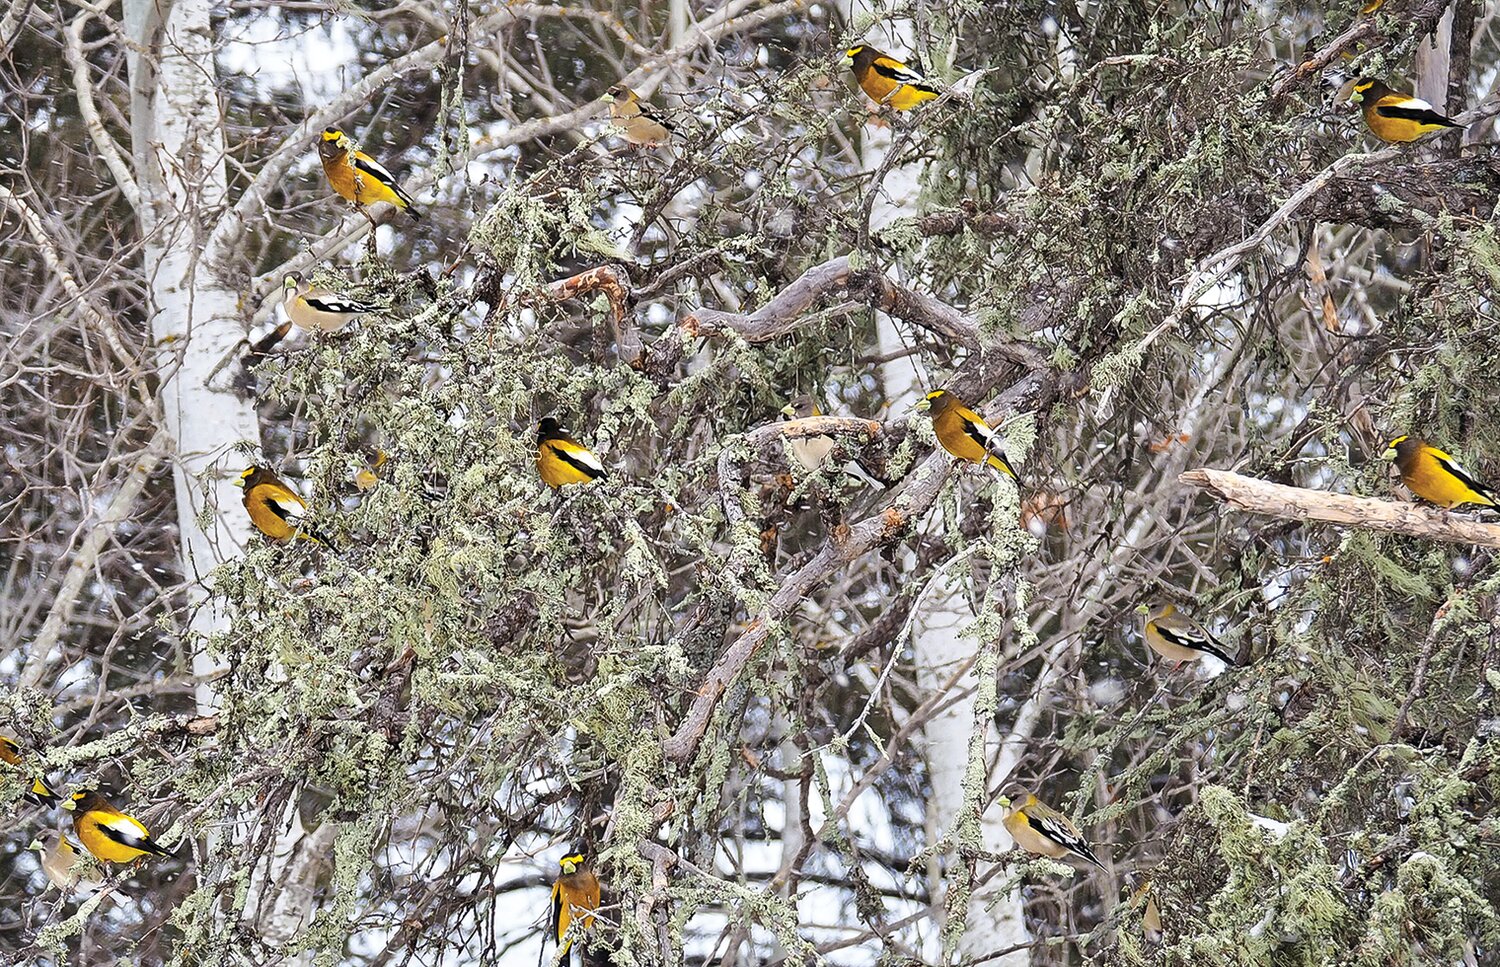 Like ornaments on a Christmas tree, evening grosbeaks filled a tree in Greaney recently, near where they’ve been 
visiting a feeder all winter. The feeder owner reports as many as 50 evening grosbeaks feeding there much of the winter. 
This picture has at least 17 evening grosbeaks in it... can you find them all? (Hint: the females are tough).